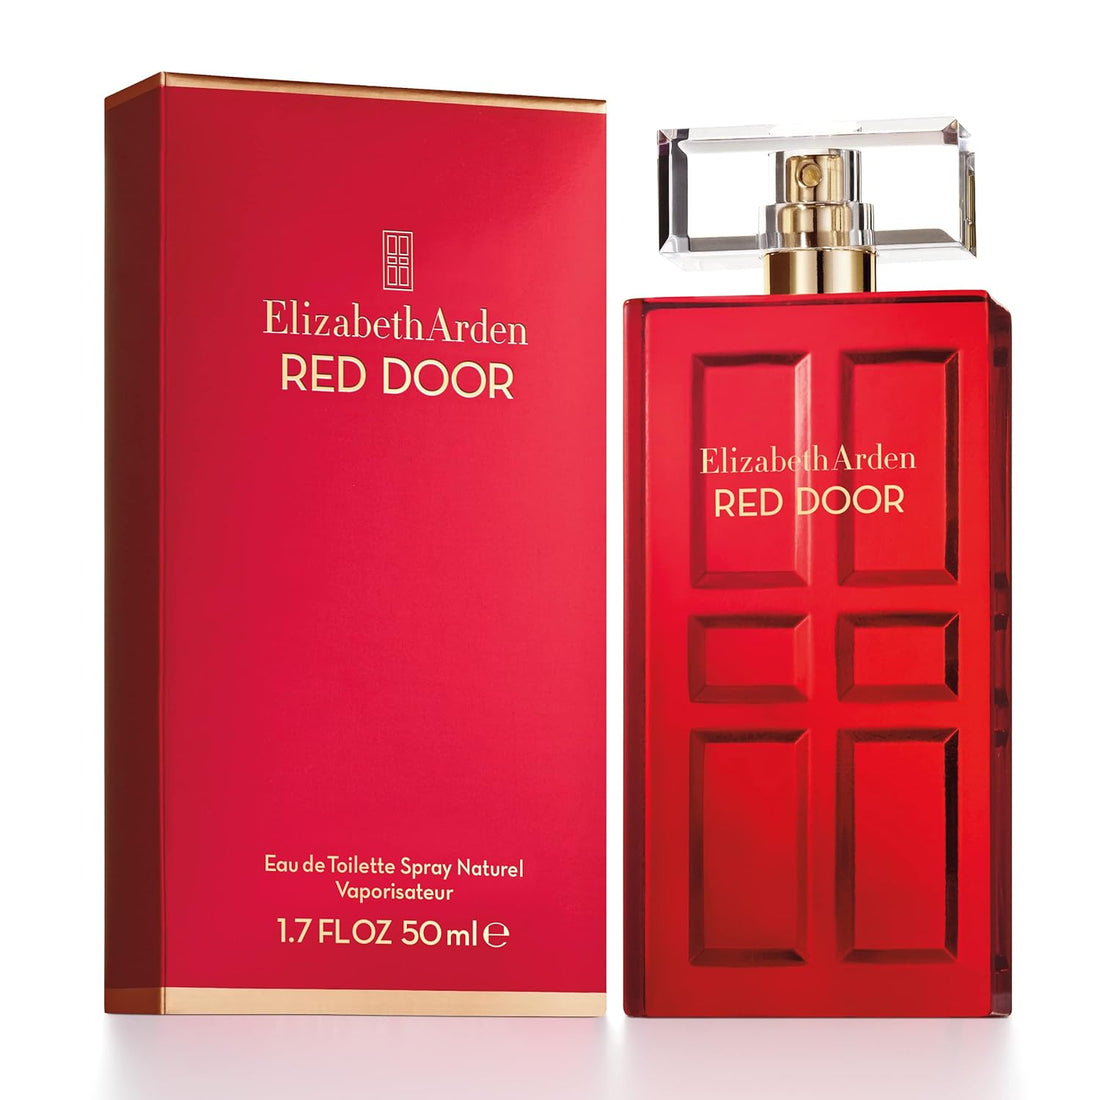 Elizabeth Arden, Red Door, fragrance review, perfume, scent, elegant, timeless, sophisticated, presentation, bottle design, packaging, fragrance profile, longevity, sillage, occasions, suitability, personal experience, value for money, conclusion